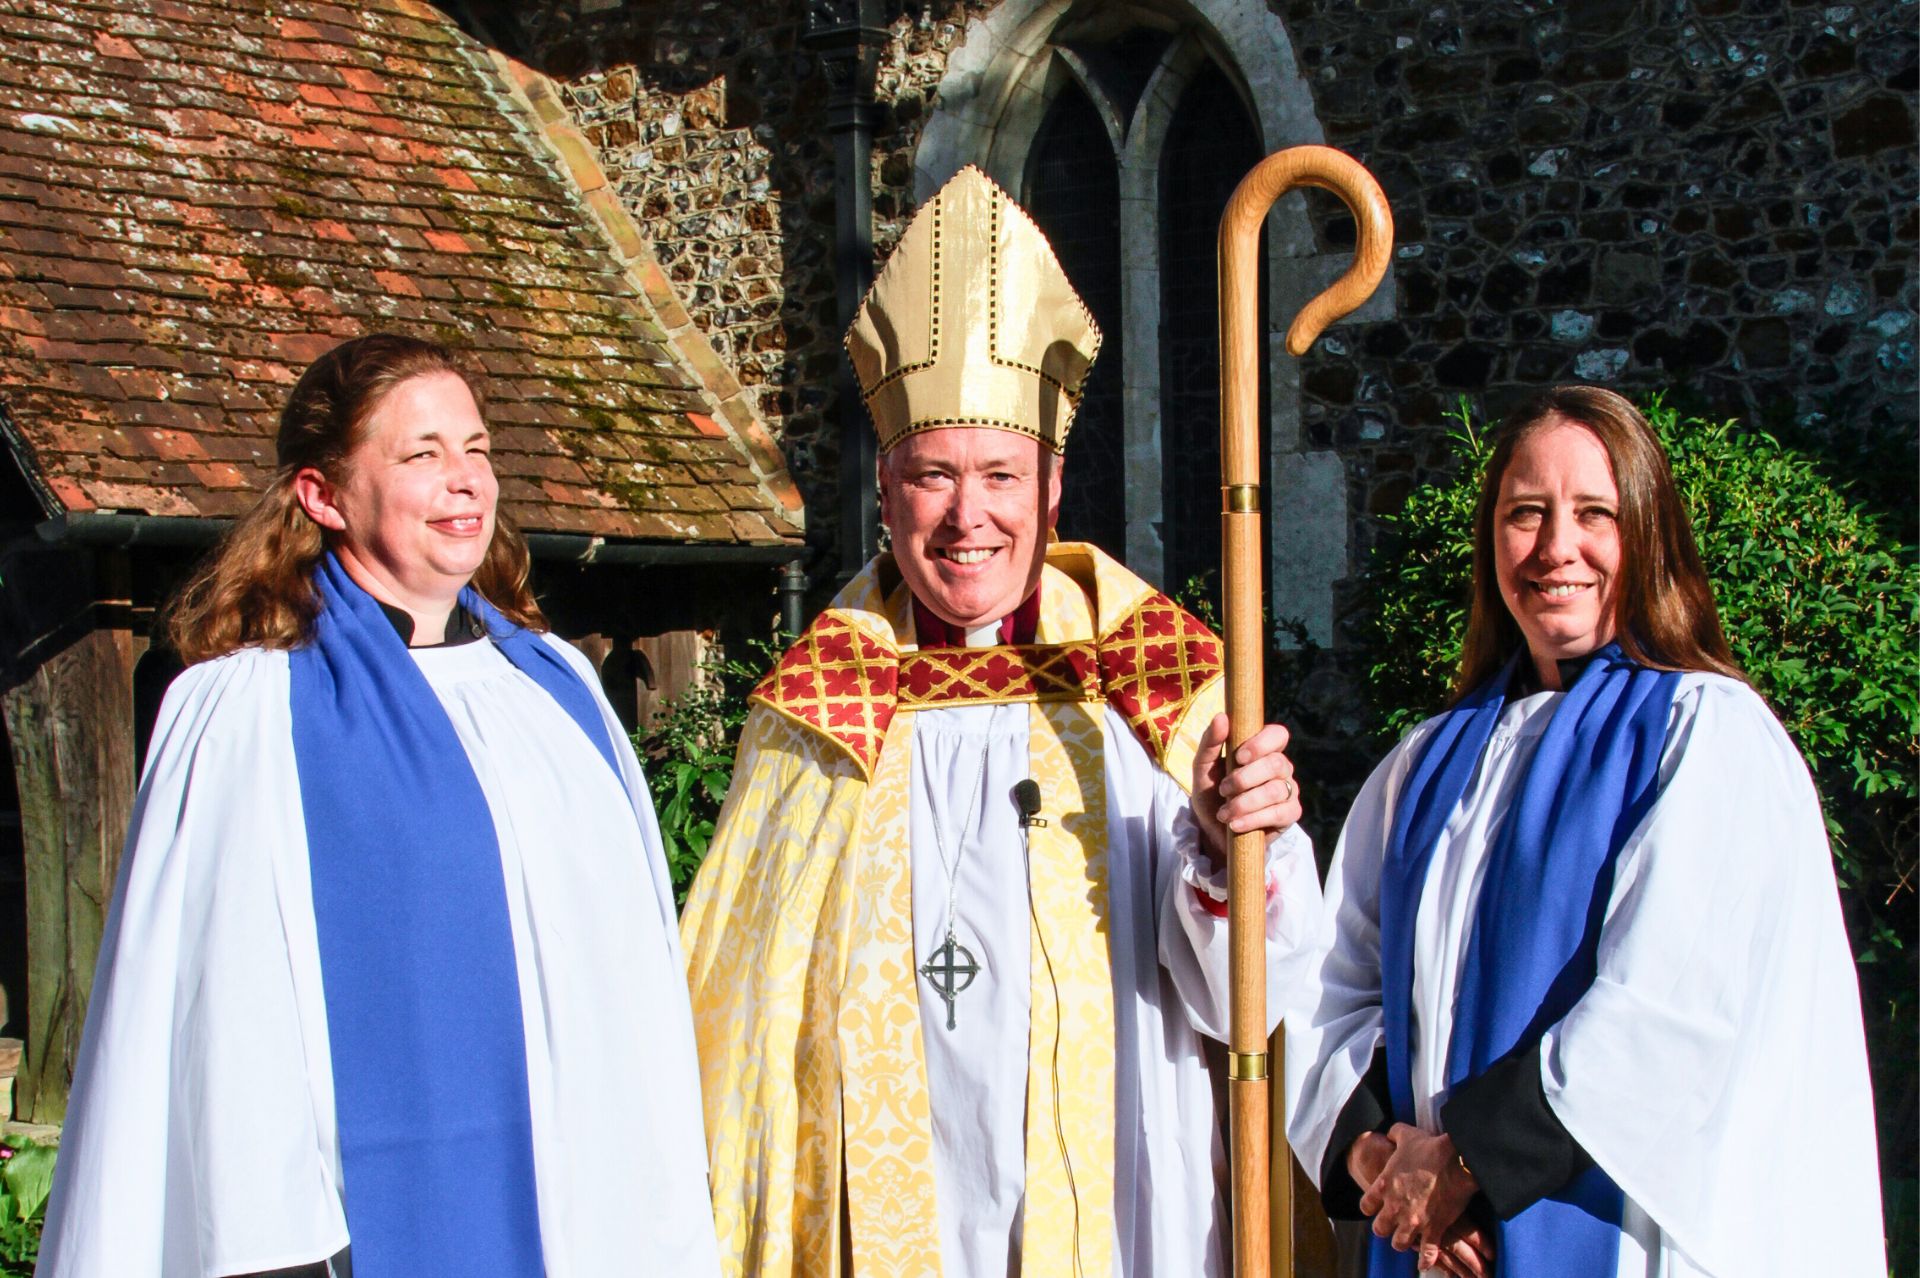 Sam Fisk and Amber Wood sttod with Bishop Paul Davies outside a church building, all in clerical robes